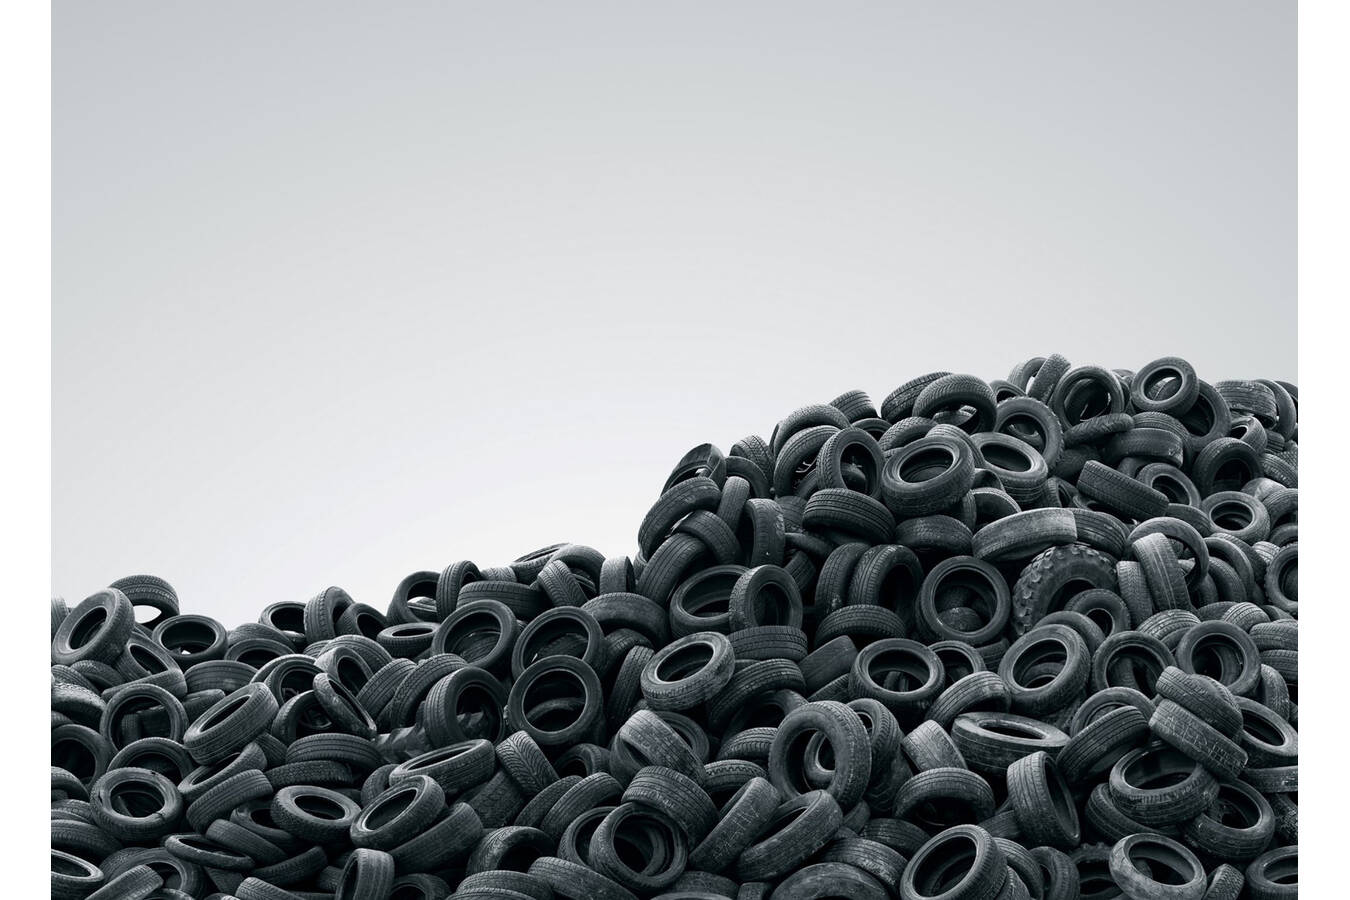 TRS choose BUSS to manufacture performance materials from used tires Tyre Recycling Solutions (TRS) choose BUSS Compounding Technology to manufacture performance materials from used tires